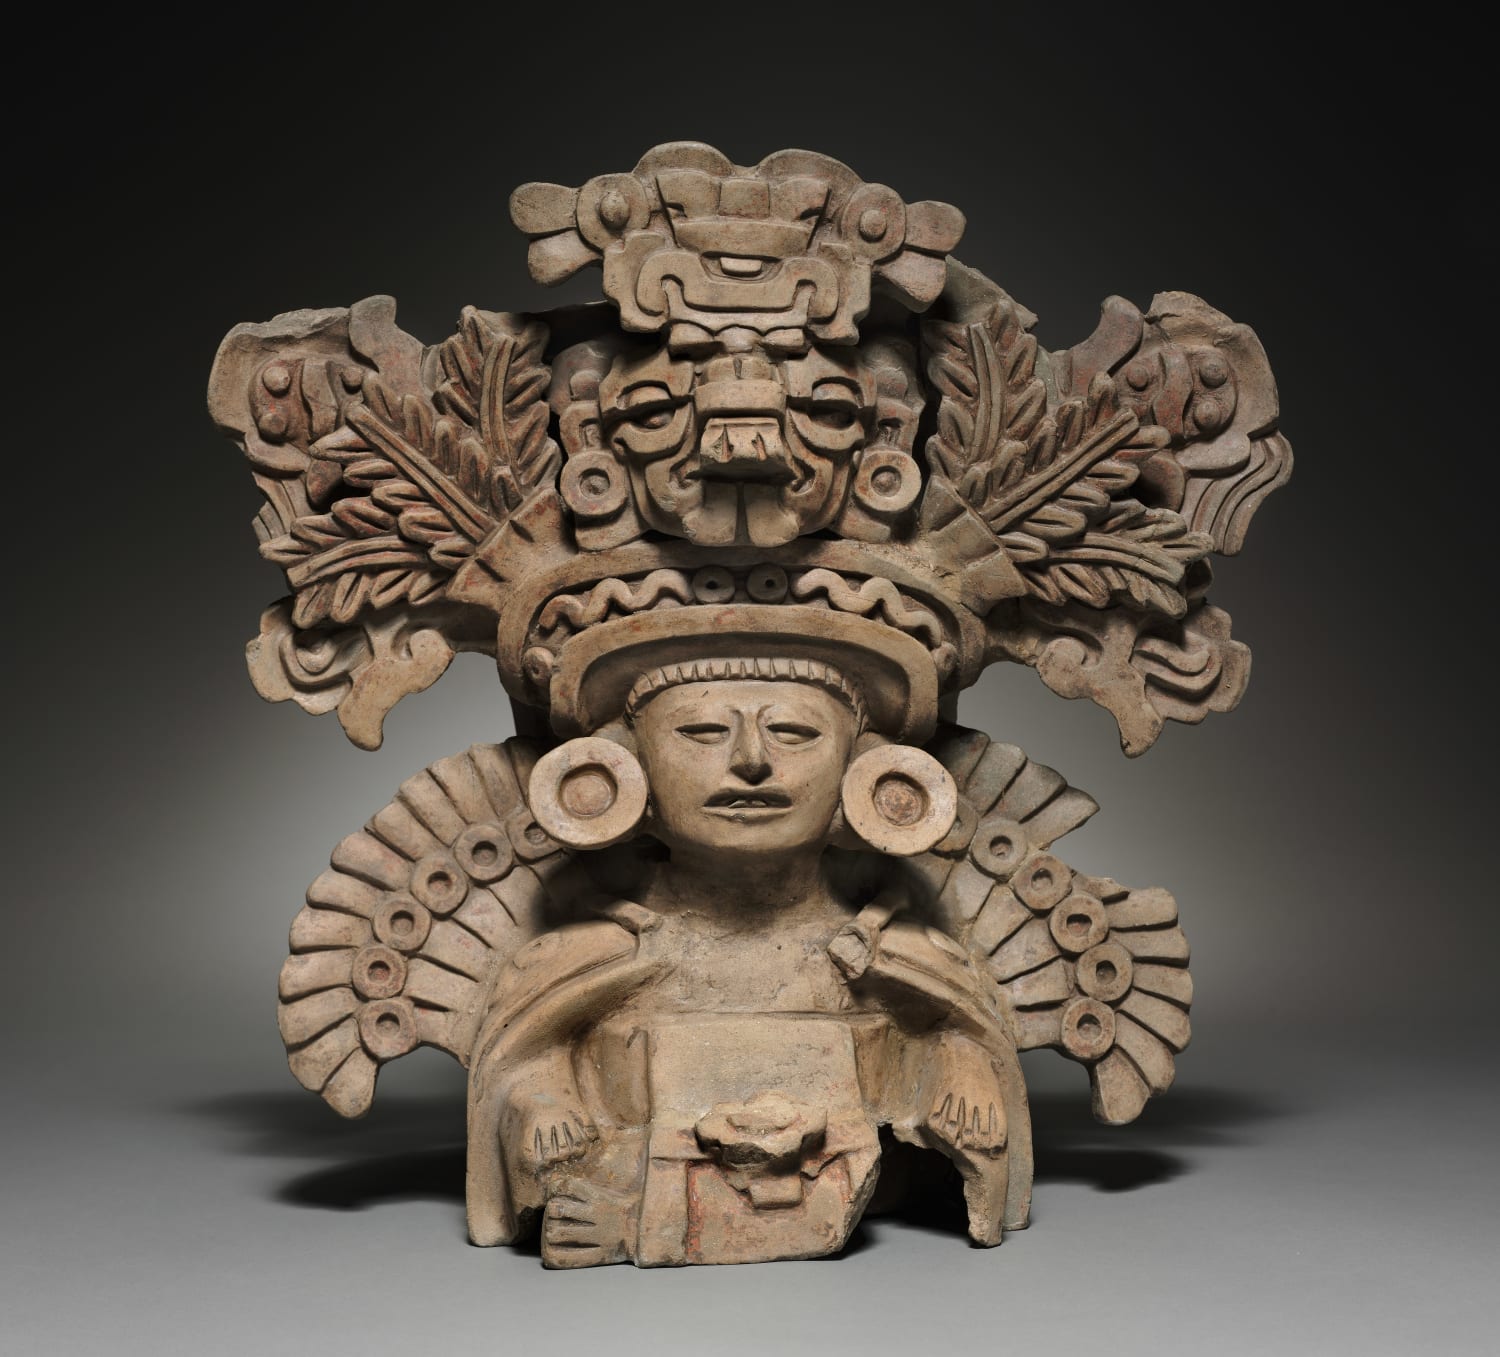 A funerary urn from Oaxaca, Mexico. Zapotec culture, 350-500 AD, now on display at the Cleveland Museum of Art